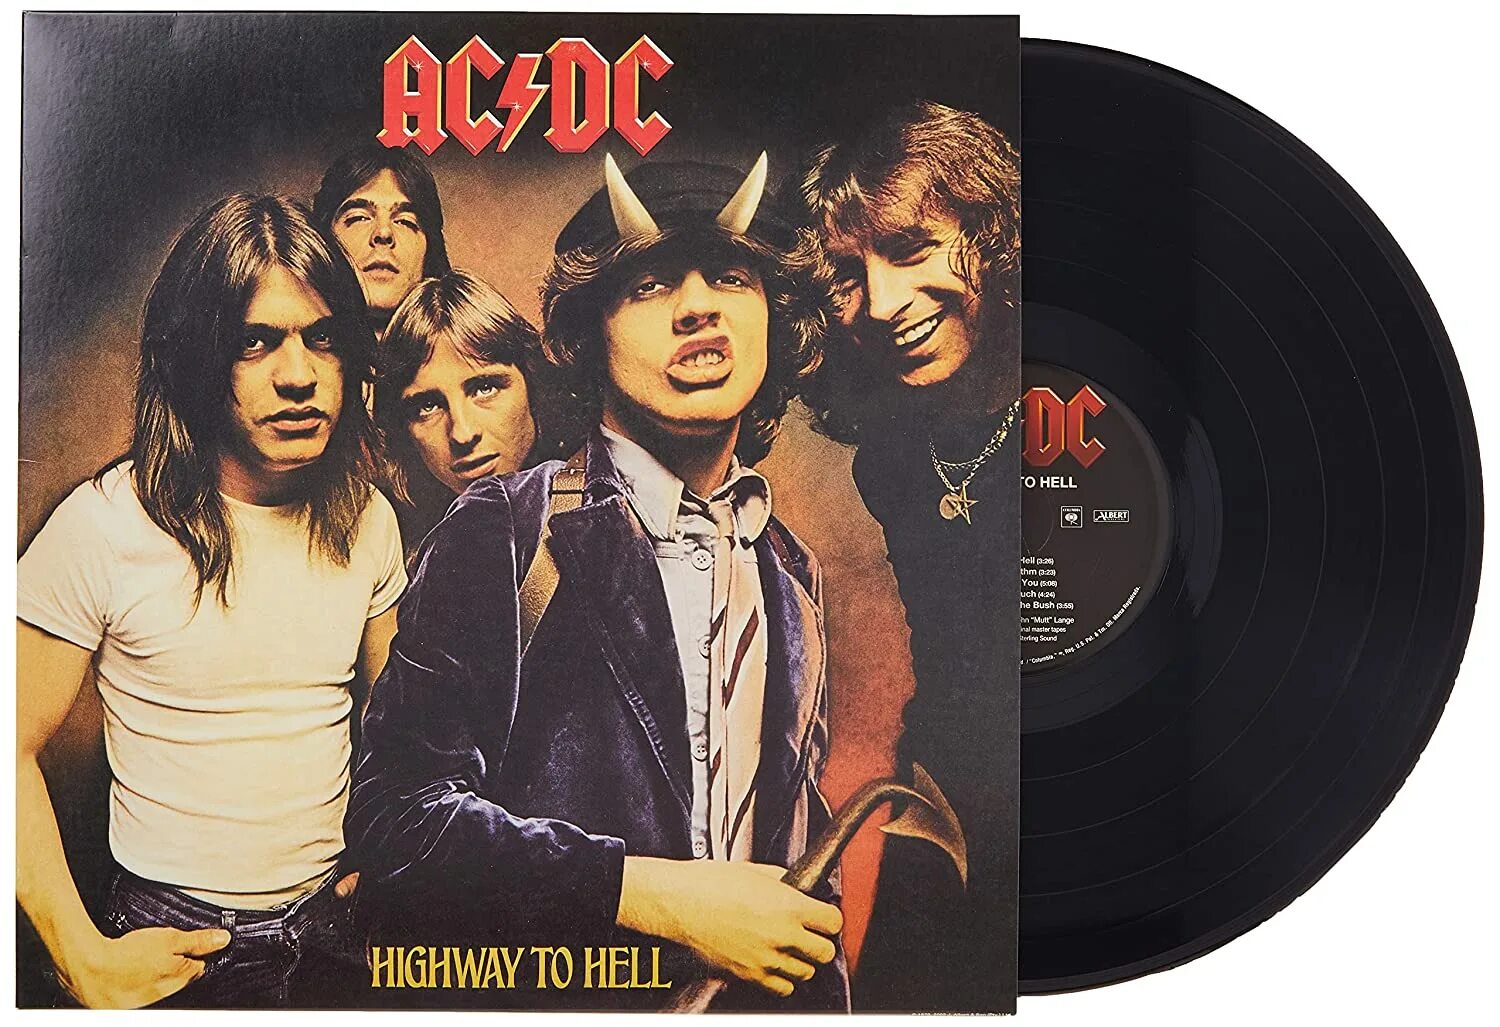 Acdc highway to hell. Винил AC/DC – Highway to Hell. Highway to Hell 1979 обложка. AC DC Highway to Hell 1979. AC DC Highway to Hell обложка.